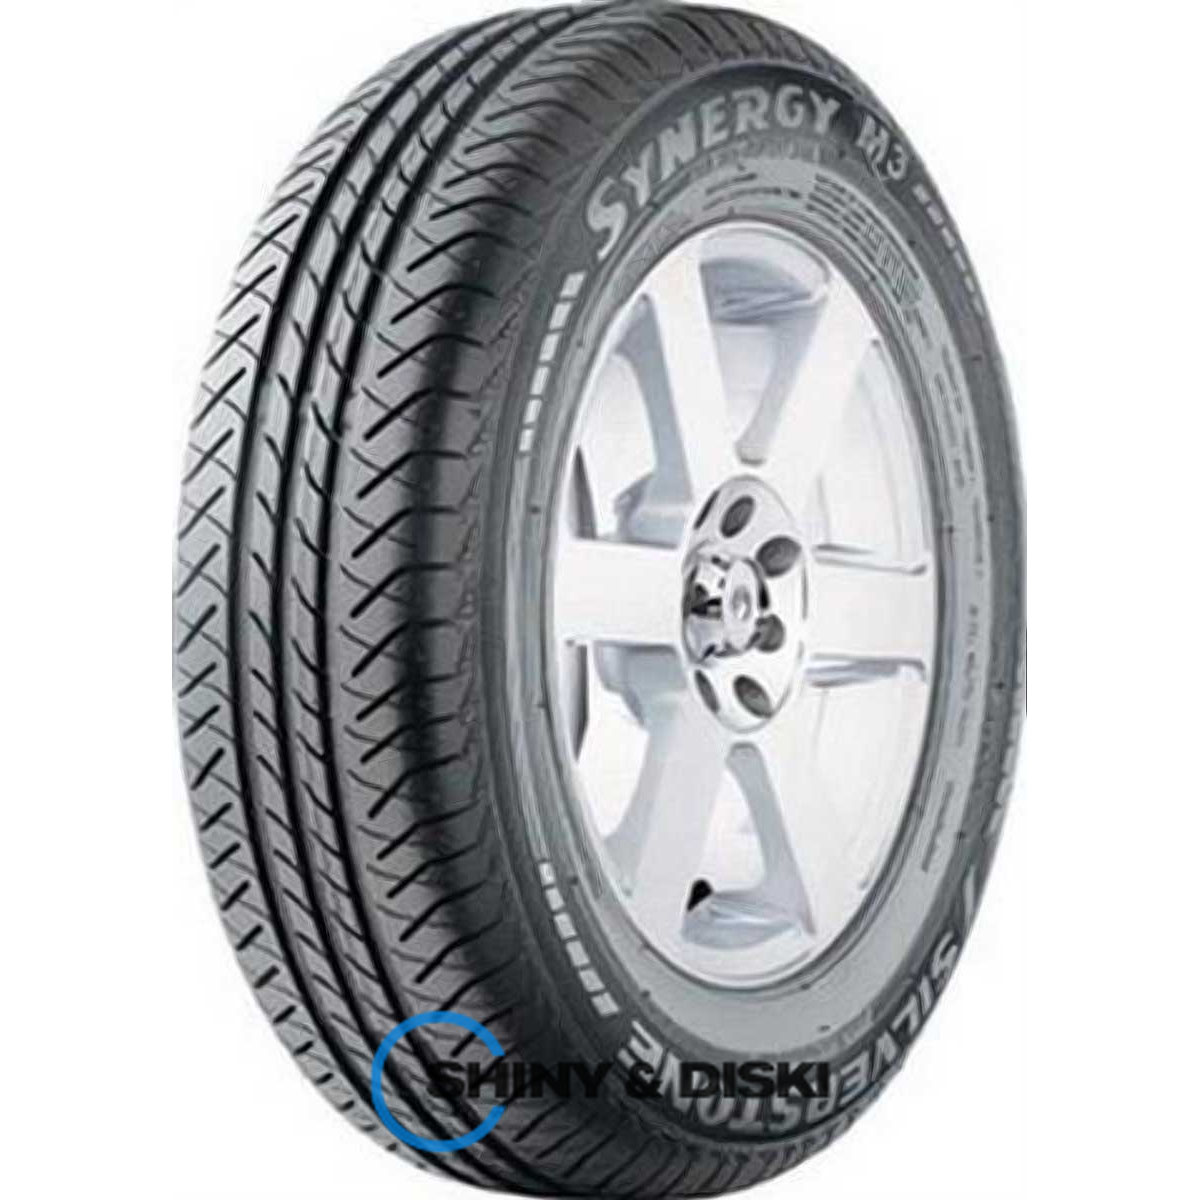 silverstone synergy m3 155/80 r13 79t